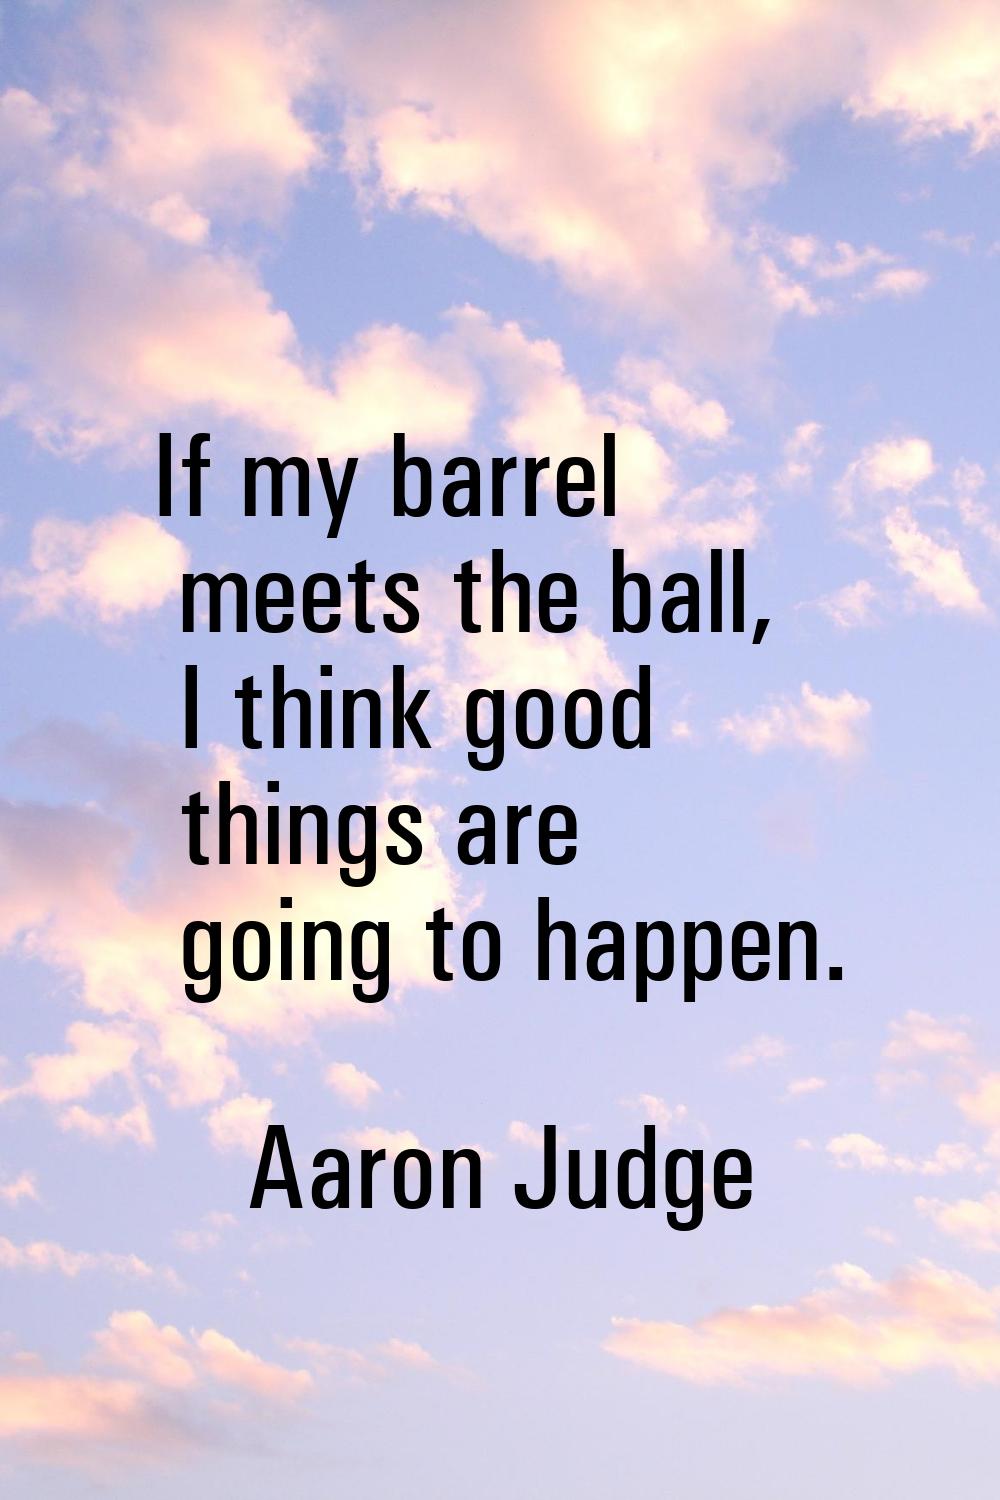 If my barrel meets the ball, I think good things are going to happen.